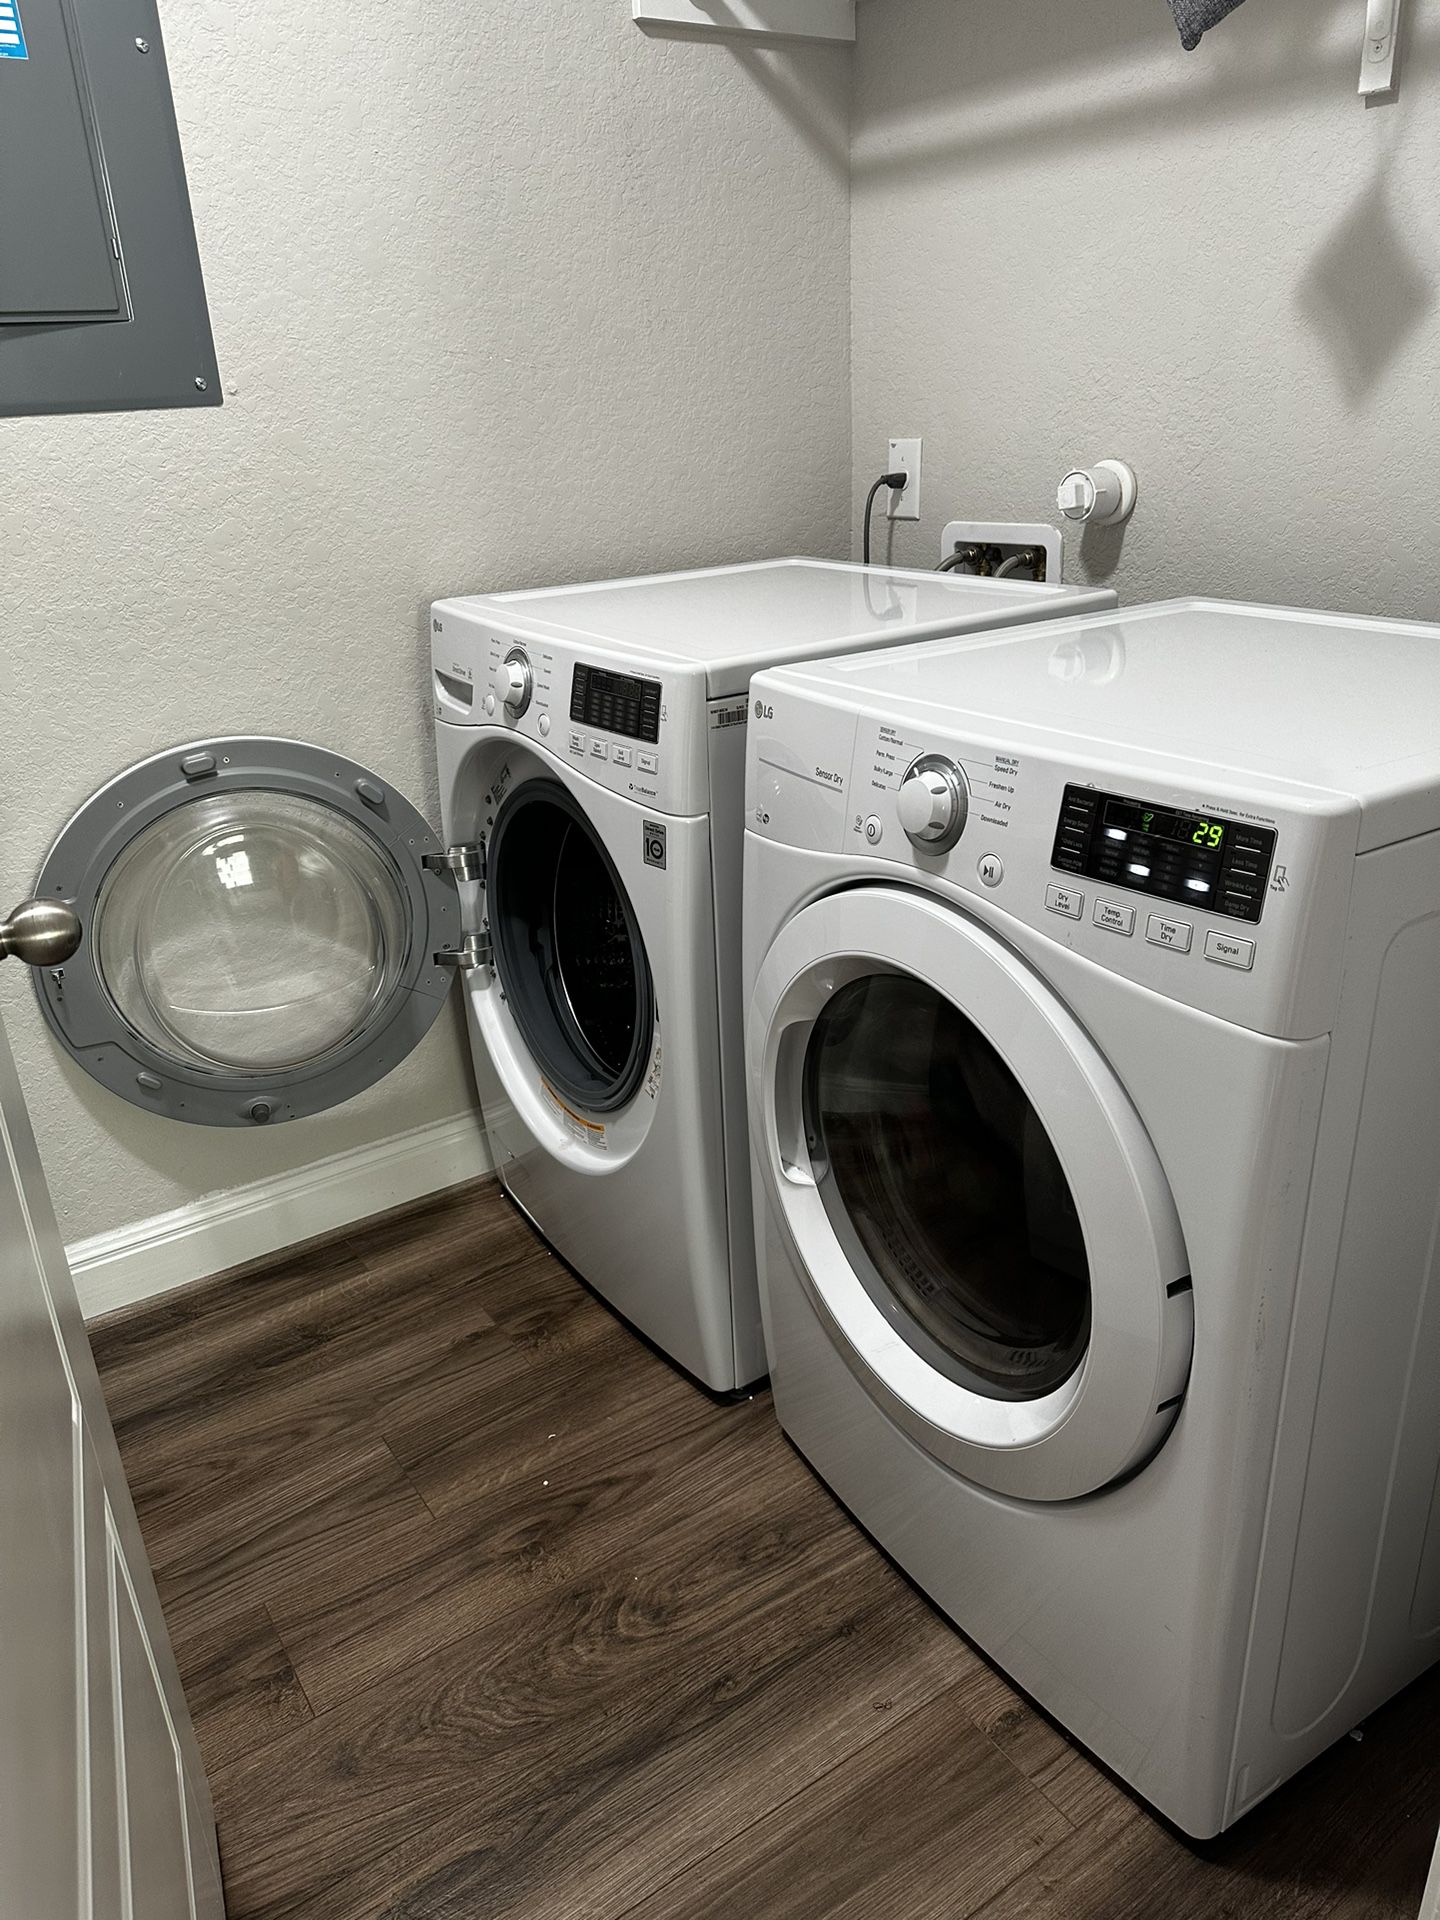 LG washer & Dryer (Works great)